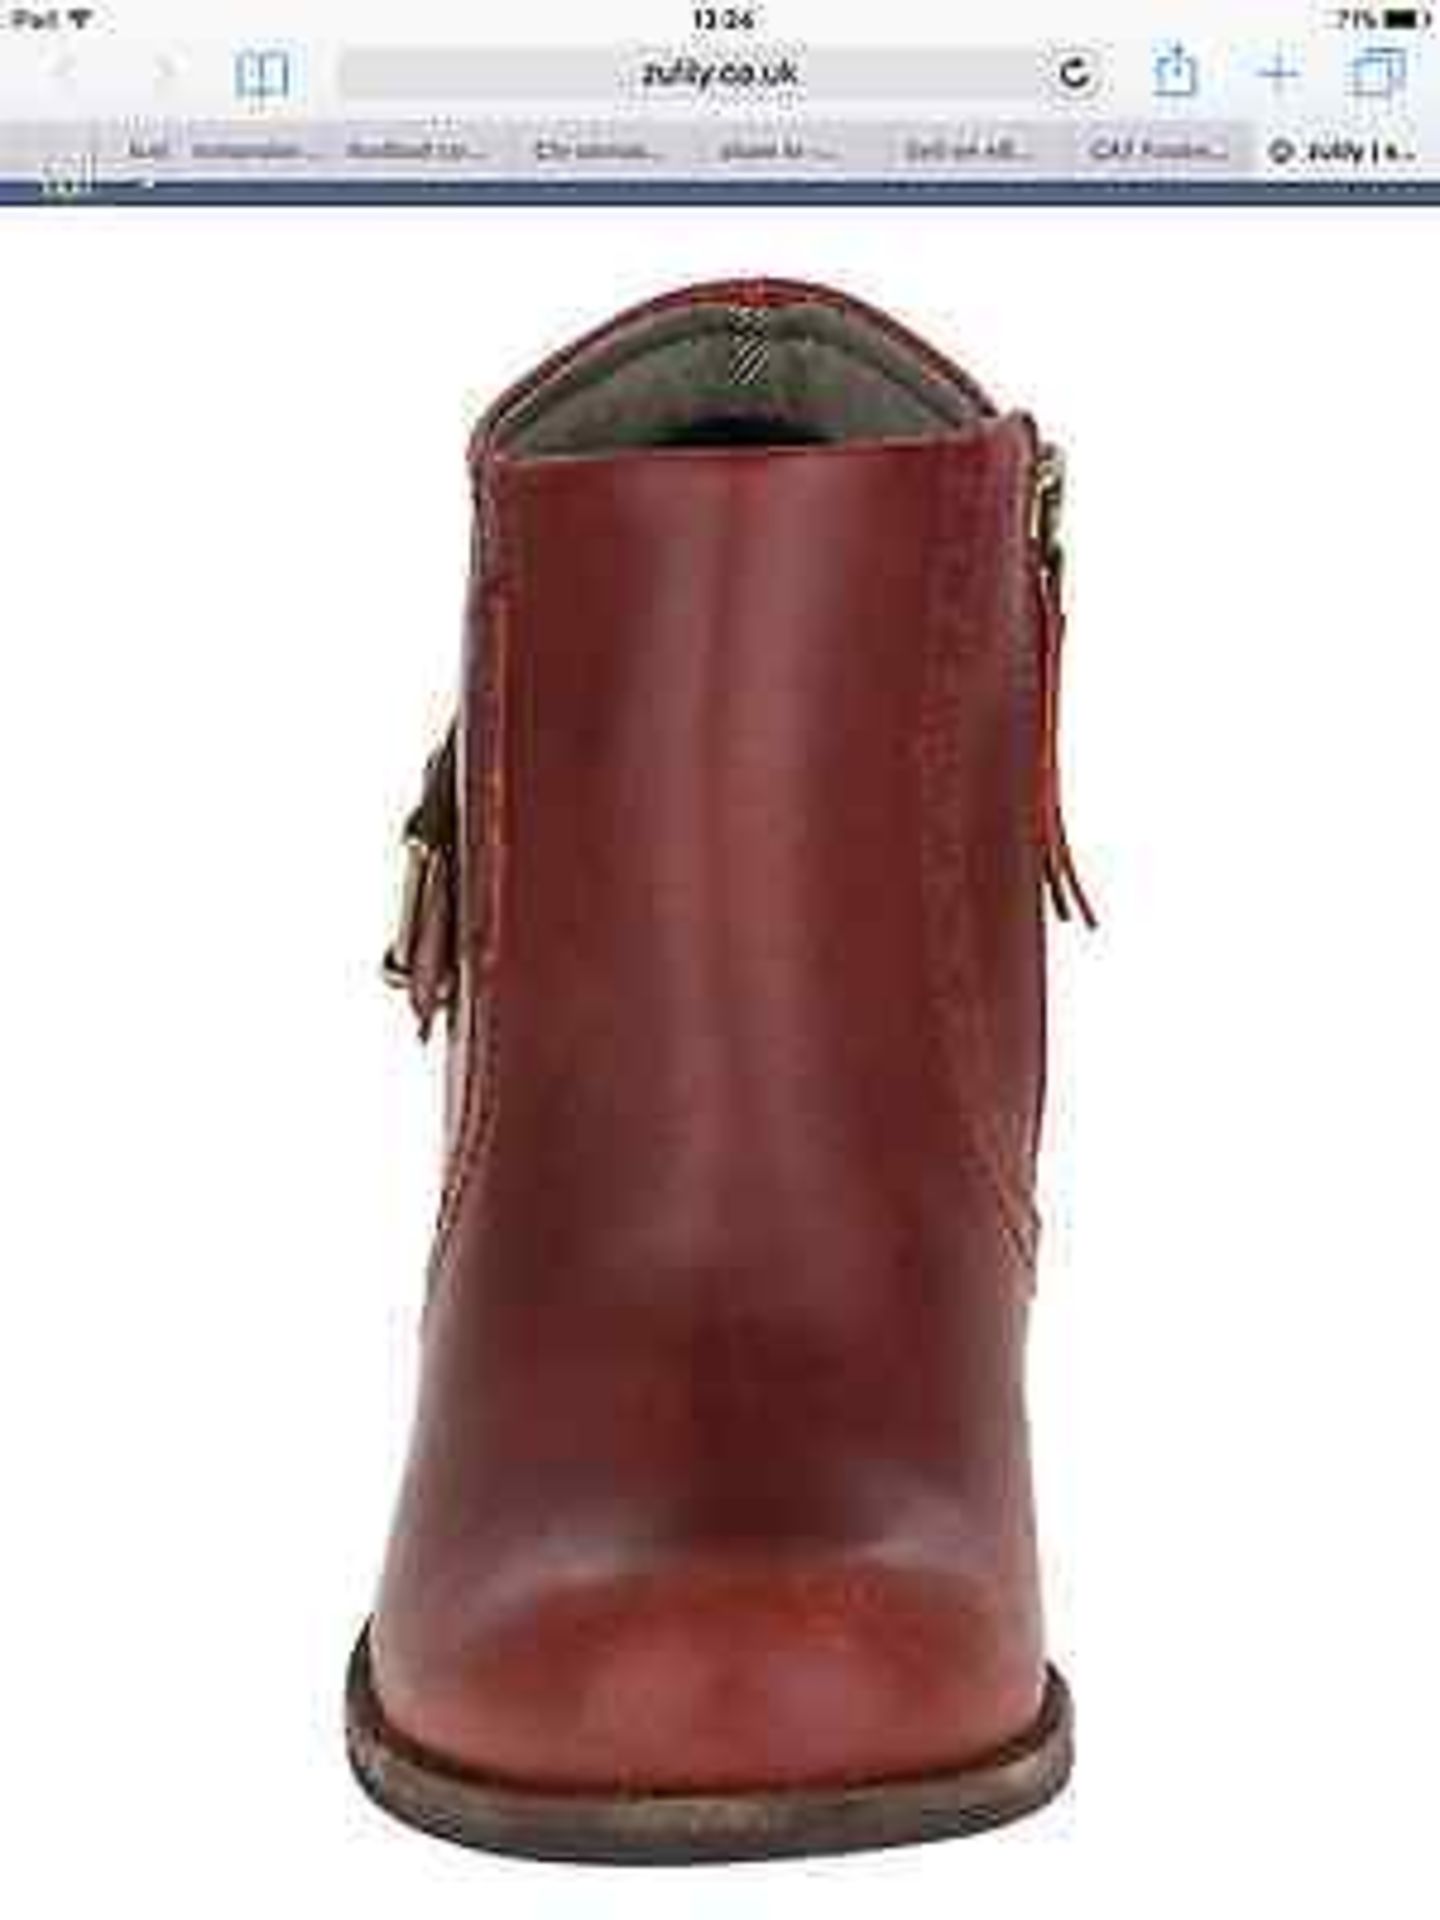 Cat Footwear Firewood Ladies Annette Leather Bootie, size 3.5, RRP £222.99 (New with box) [Ref: ] - Image 3 of 7